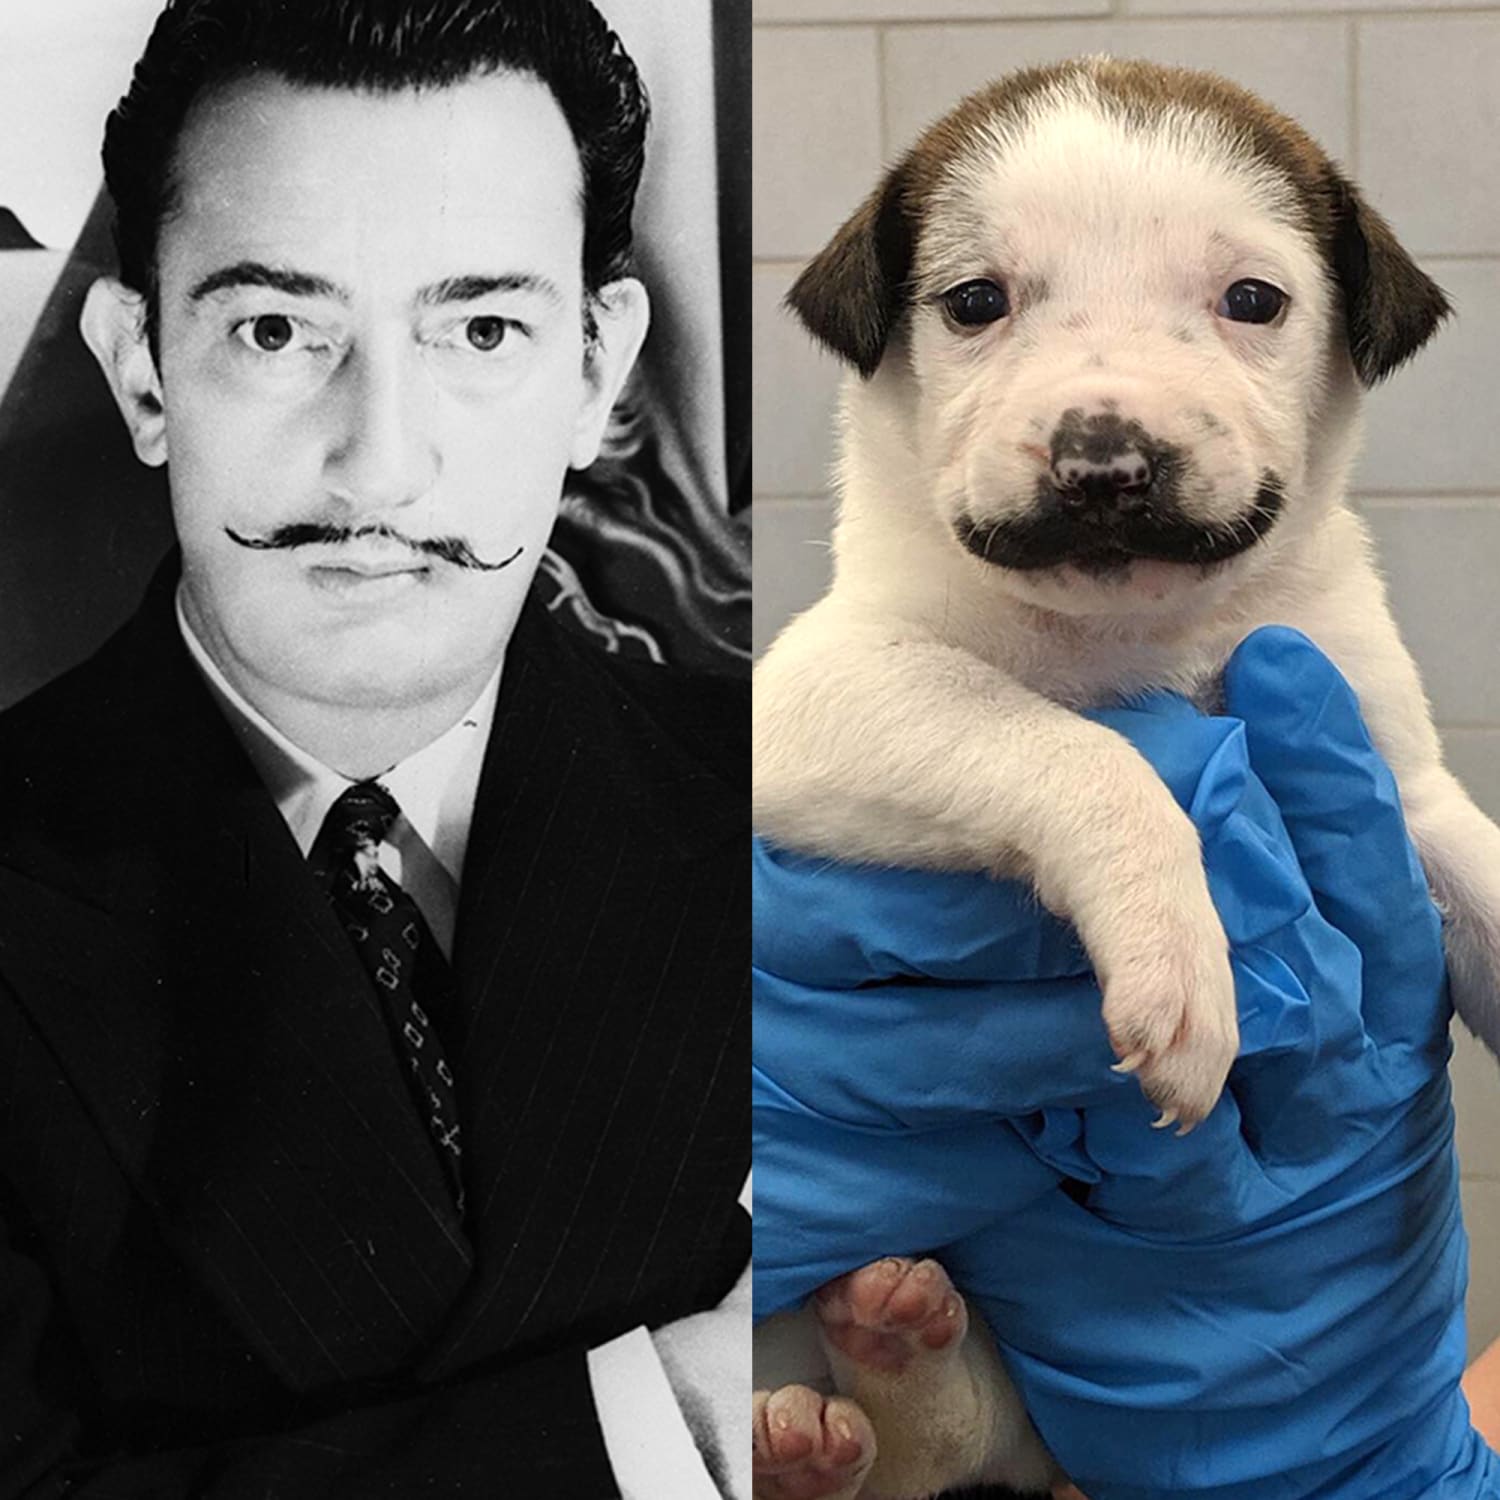 Mustache puppy' Salvador Dolly looks exactly like a certain artist